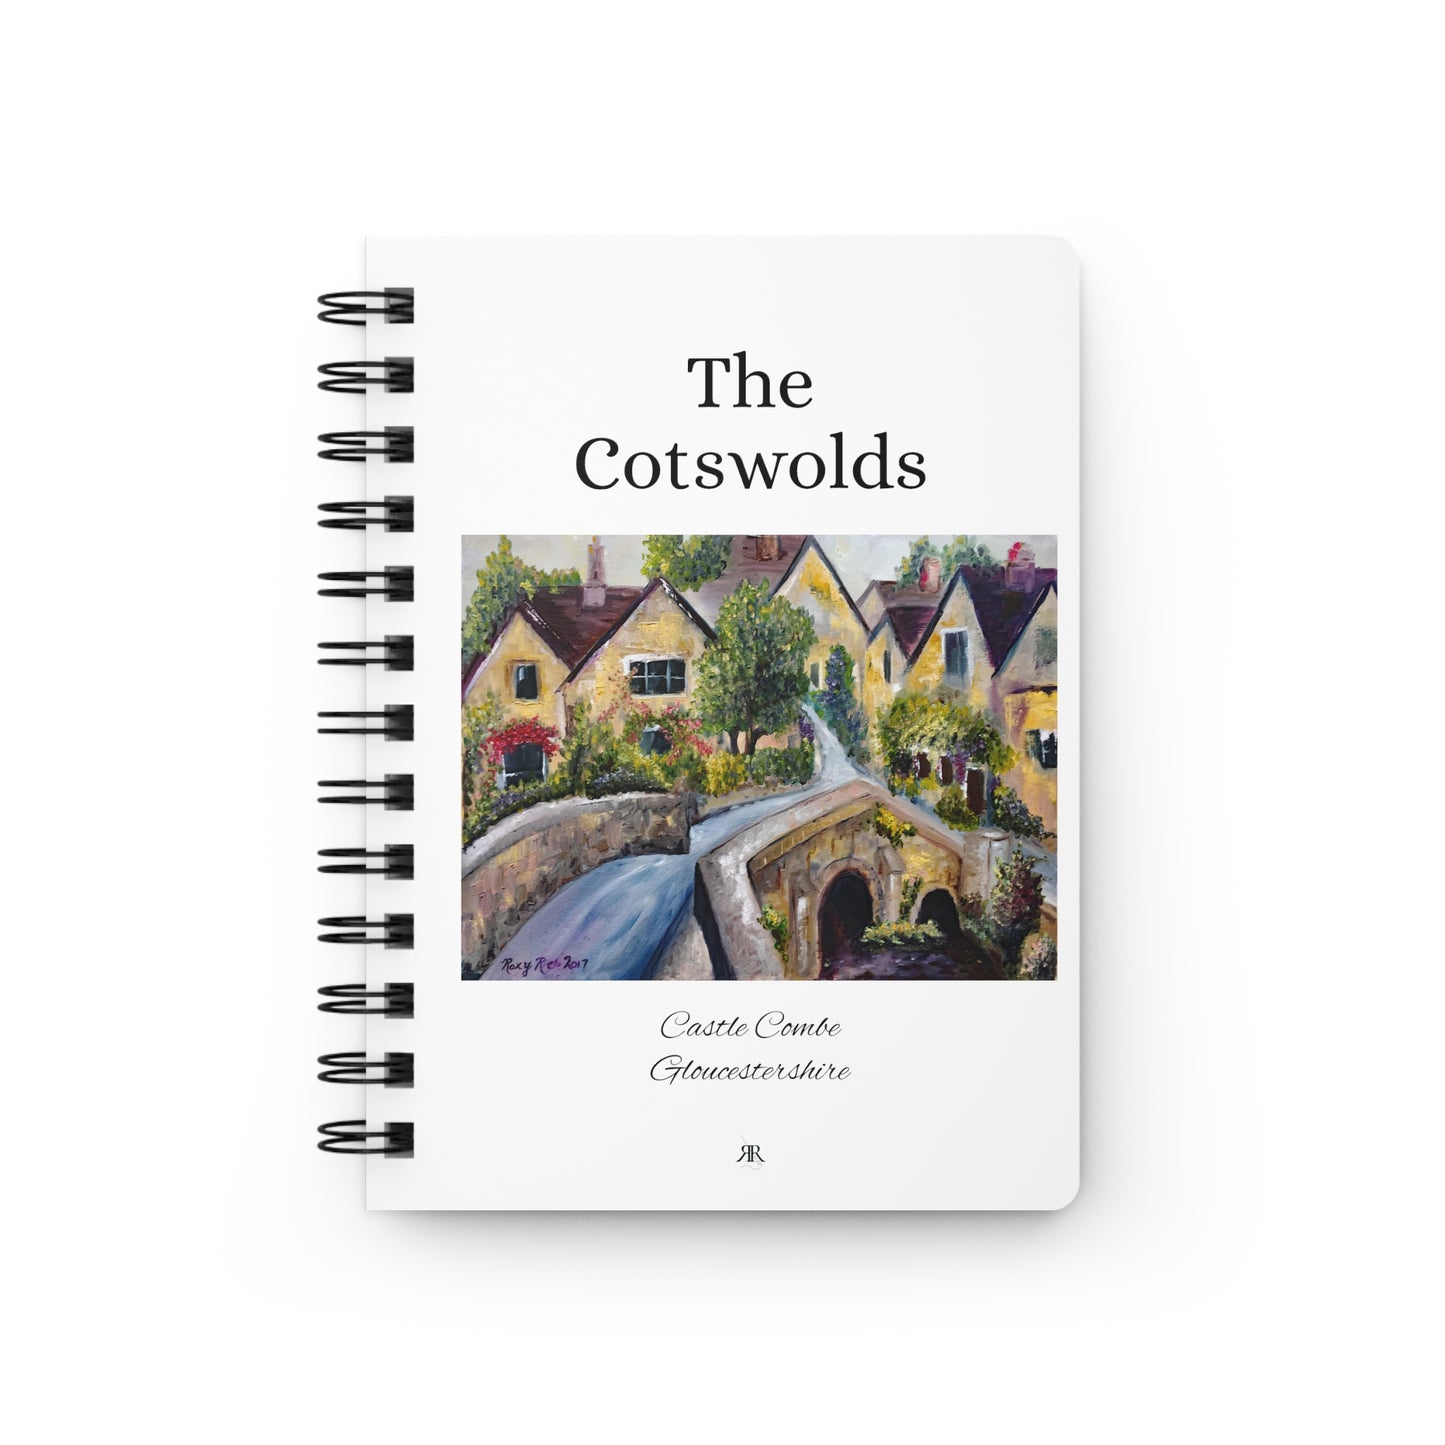 TheCotswolds- Spiral Bound Journal